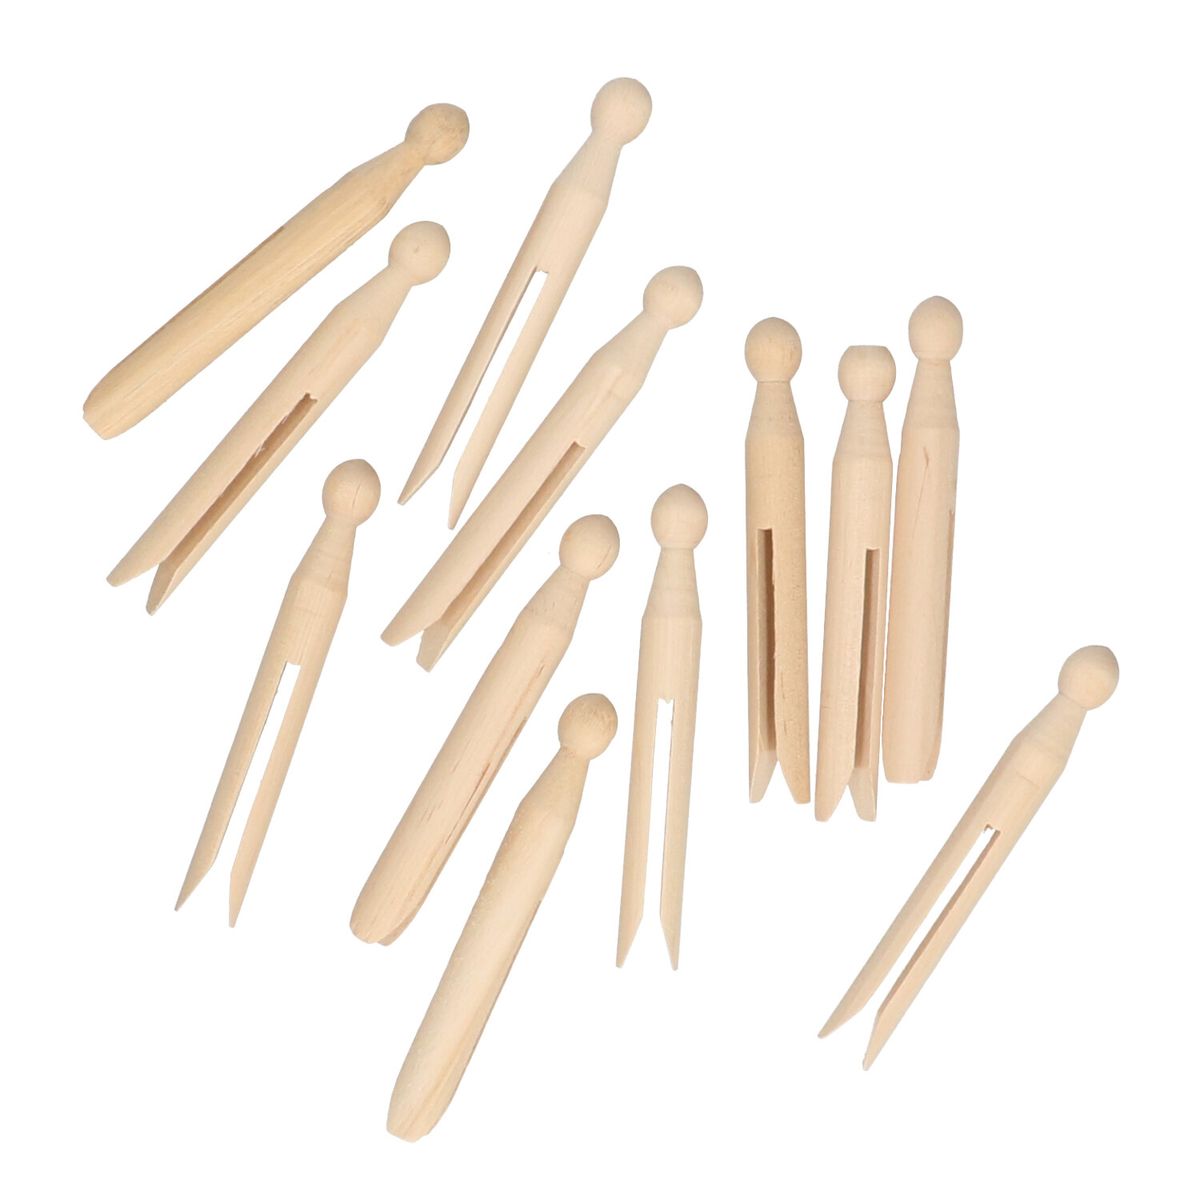 Honey-Can-Do Clothespins, Wood, 24-Pk.